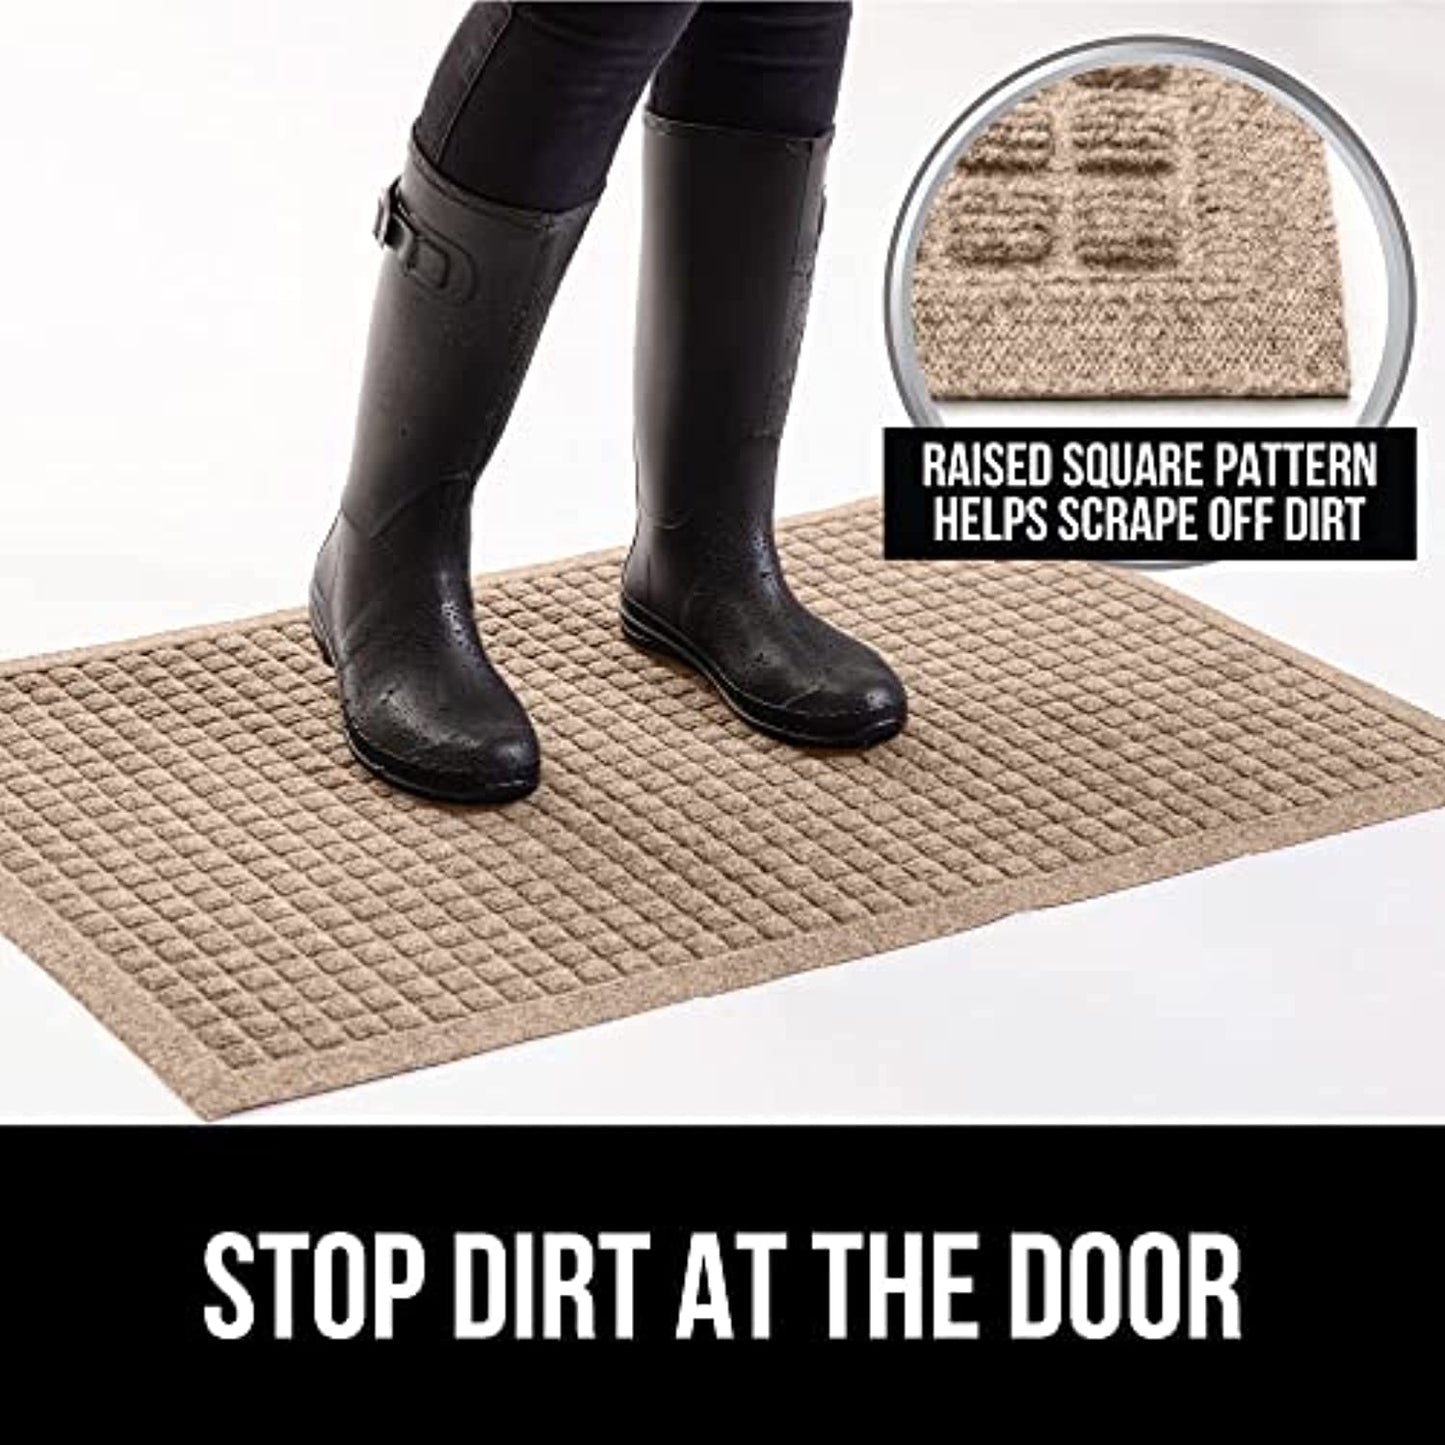 Gorilla Grip All Weather Absorbent Doormat  Dries Quickly  72x24  Absorbs Up to 2.75 Cups of Water  Captures Dirt  Stain and Fade Resistant  Durable Backing  Indoor Outdoor Mats  Boot Scraper  Blue